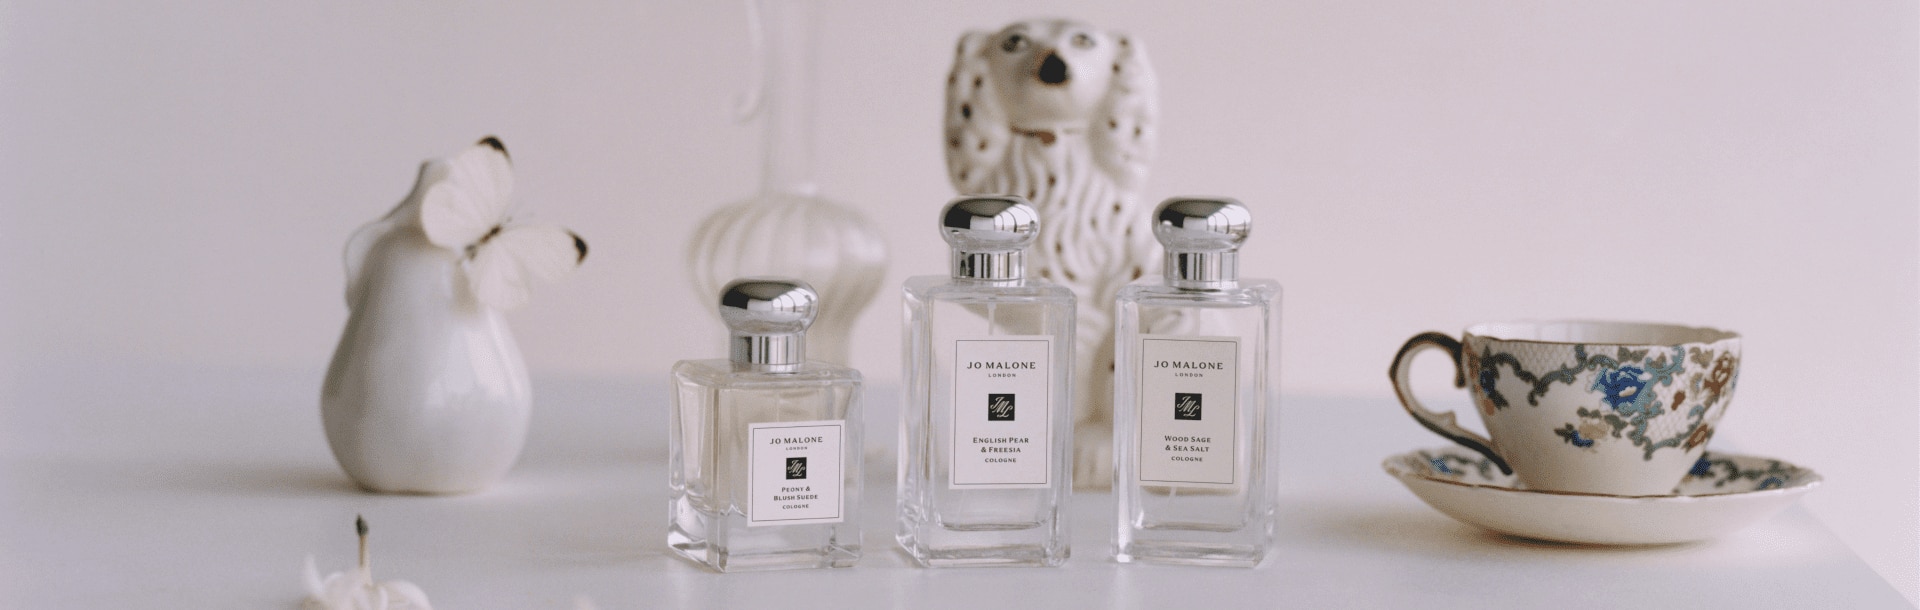 Jo Malone London iconic colognes, in a 50ml and two 100ml colognes